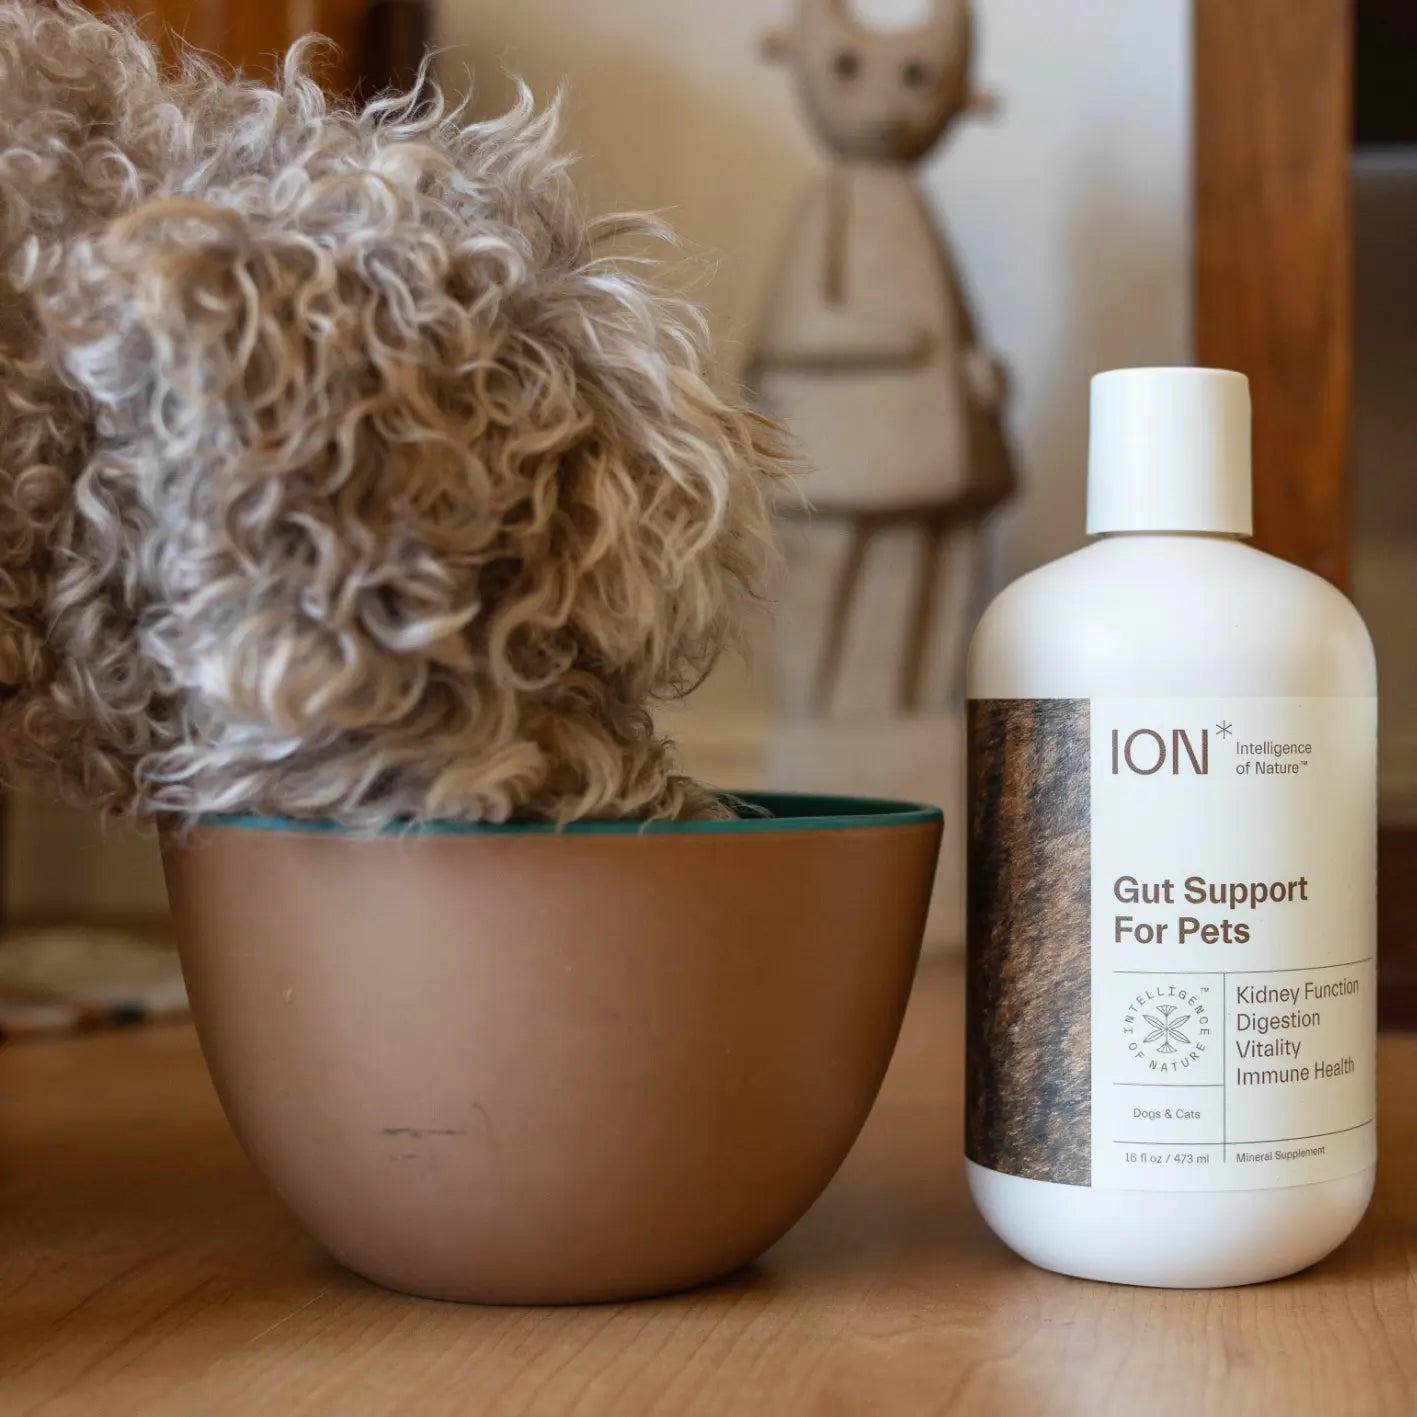 ION Gut Support For Pets Health Supplement and dog